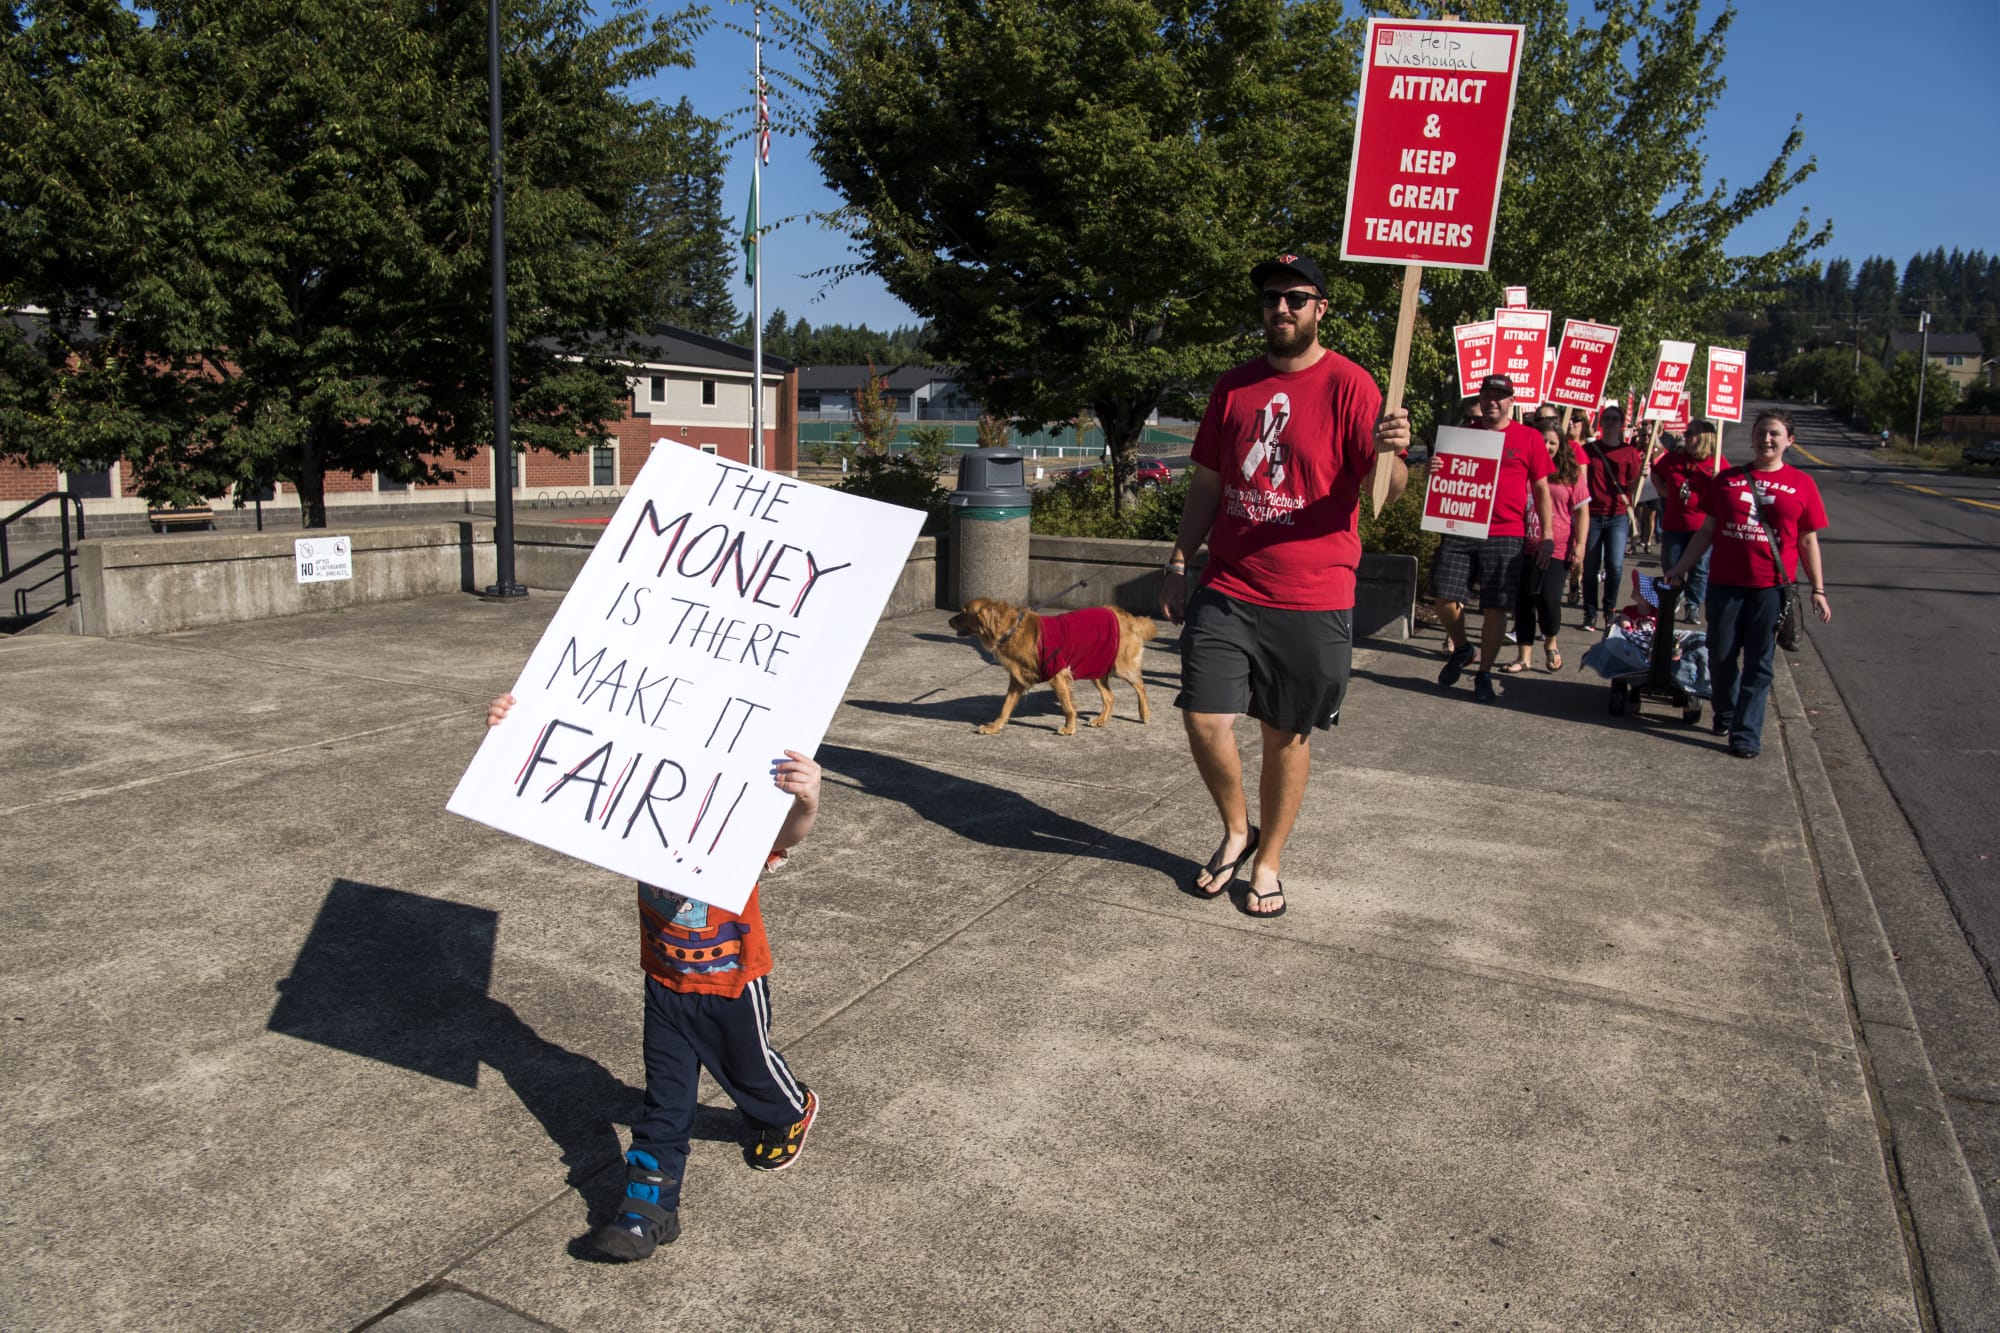 Timothy Tauscher of Washoughal, 3, marches in front of the teachers outside Washougal High School during the first day of the strike on Tuesday, Aug. 28, 2018. Tauscher's grandmother is a teacher at the school so his mother, Ellie, brought him out to help support her and the other teachers.